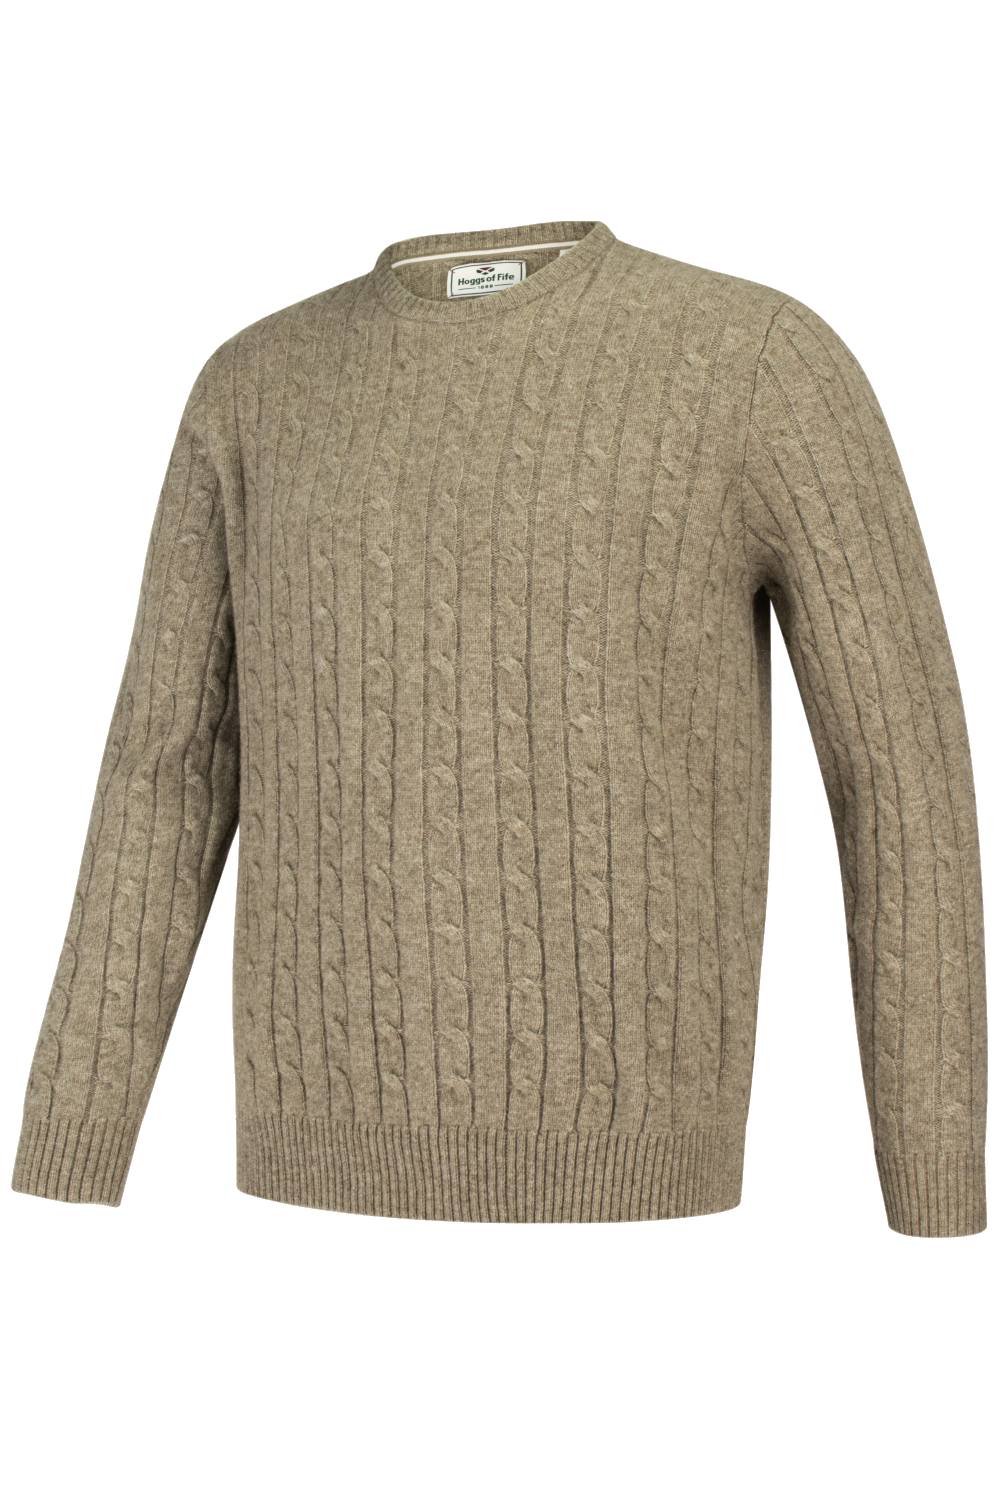 Jedburgh Crew Neck Cable Pullover in Oatmeal 